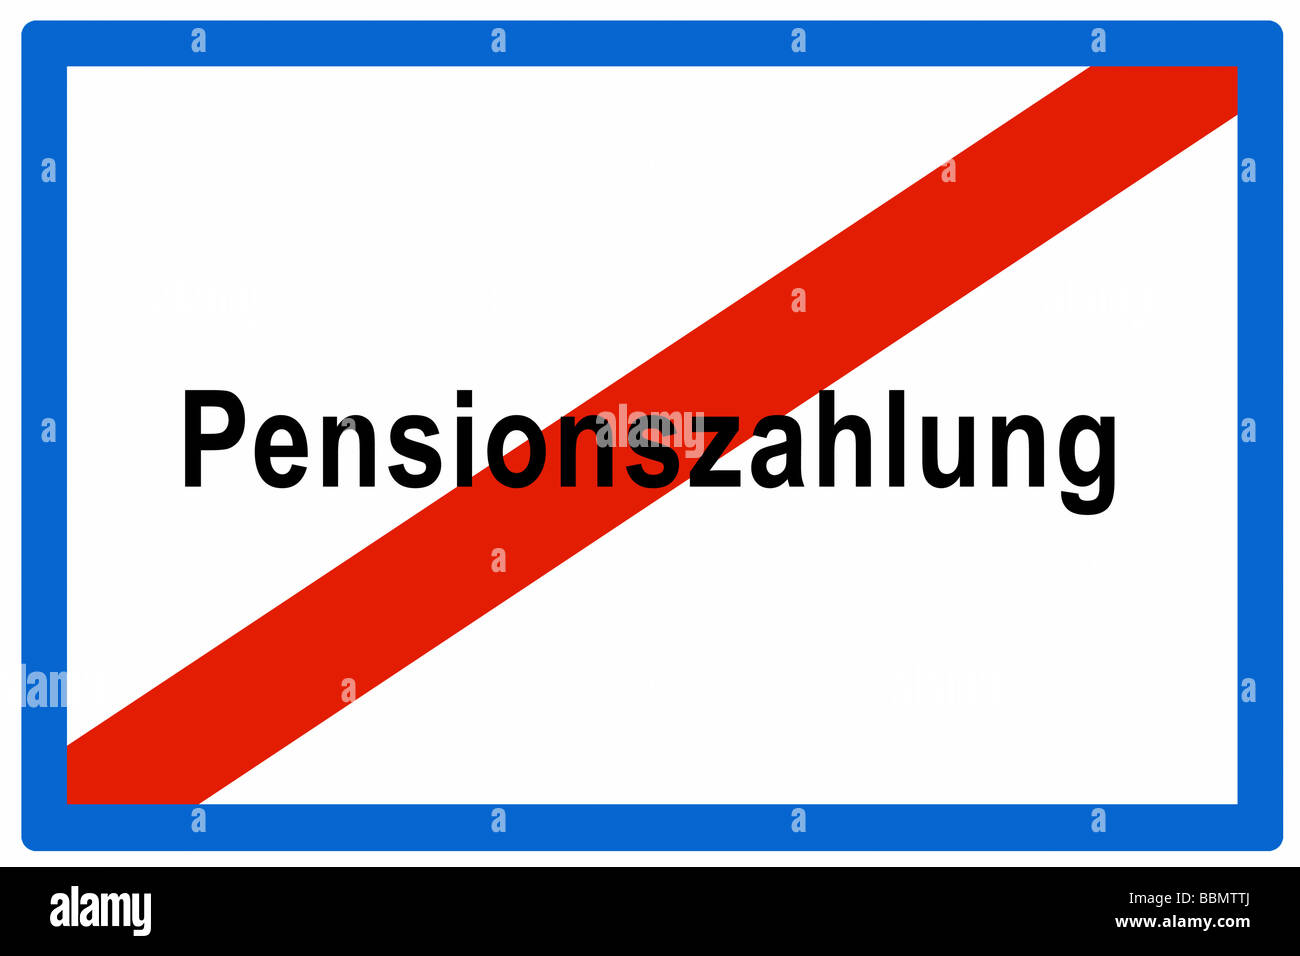 Signboard, Austrian town sign, end of town, 'Leaving Pension Payment' Stock Photo